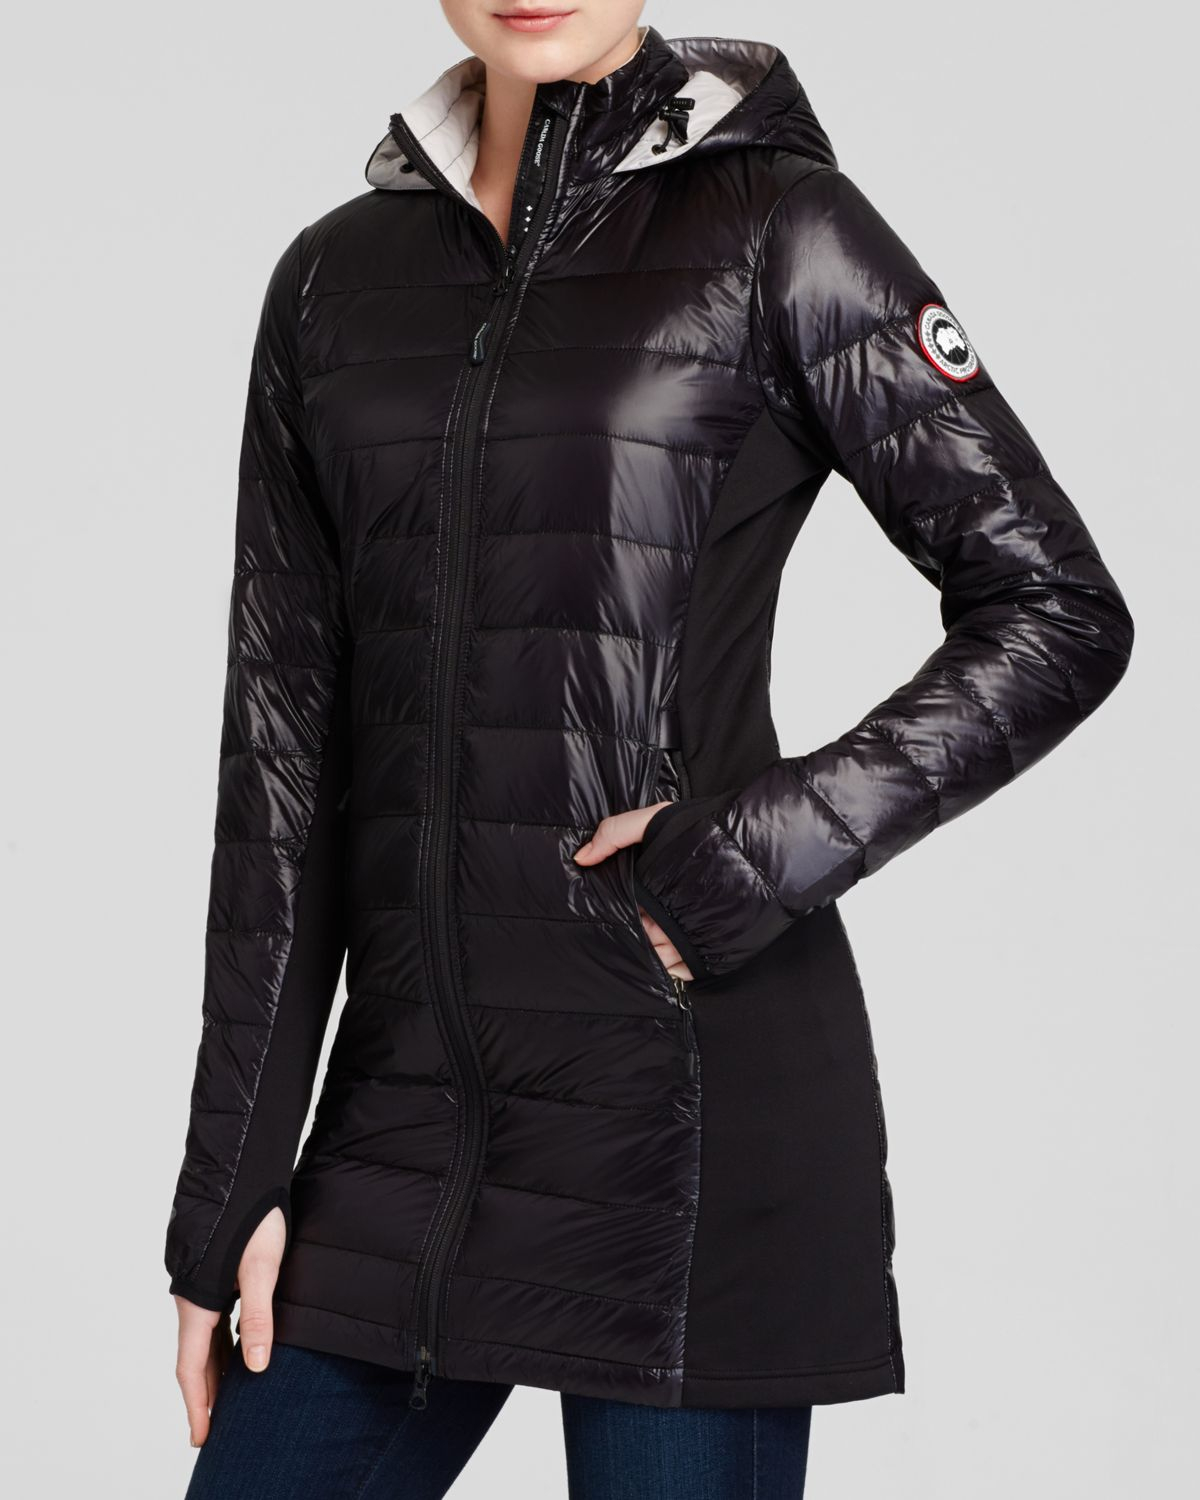 cheap canada goose jackets in toronto store sale canada goose